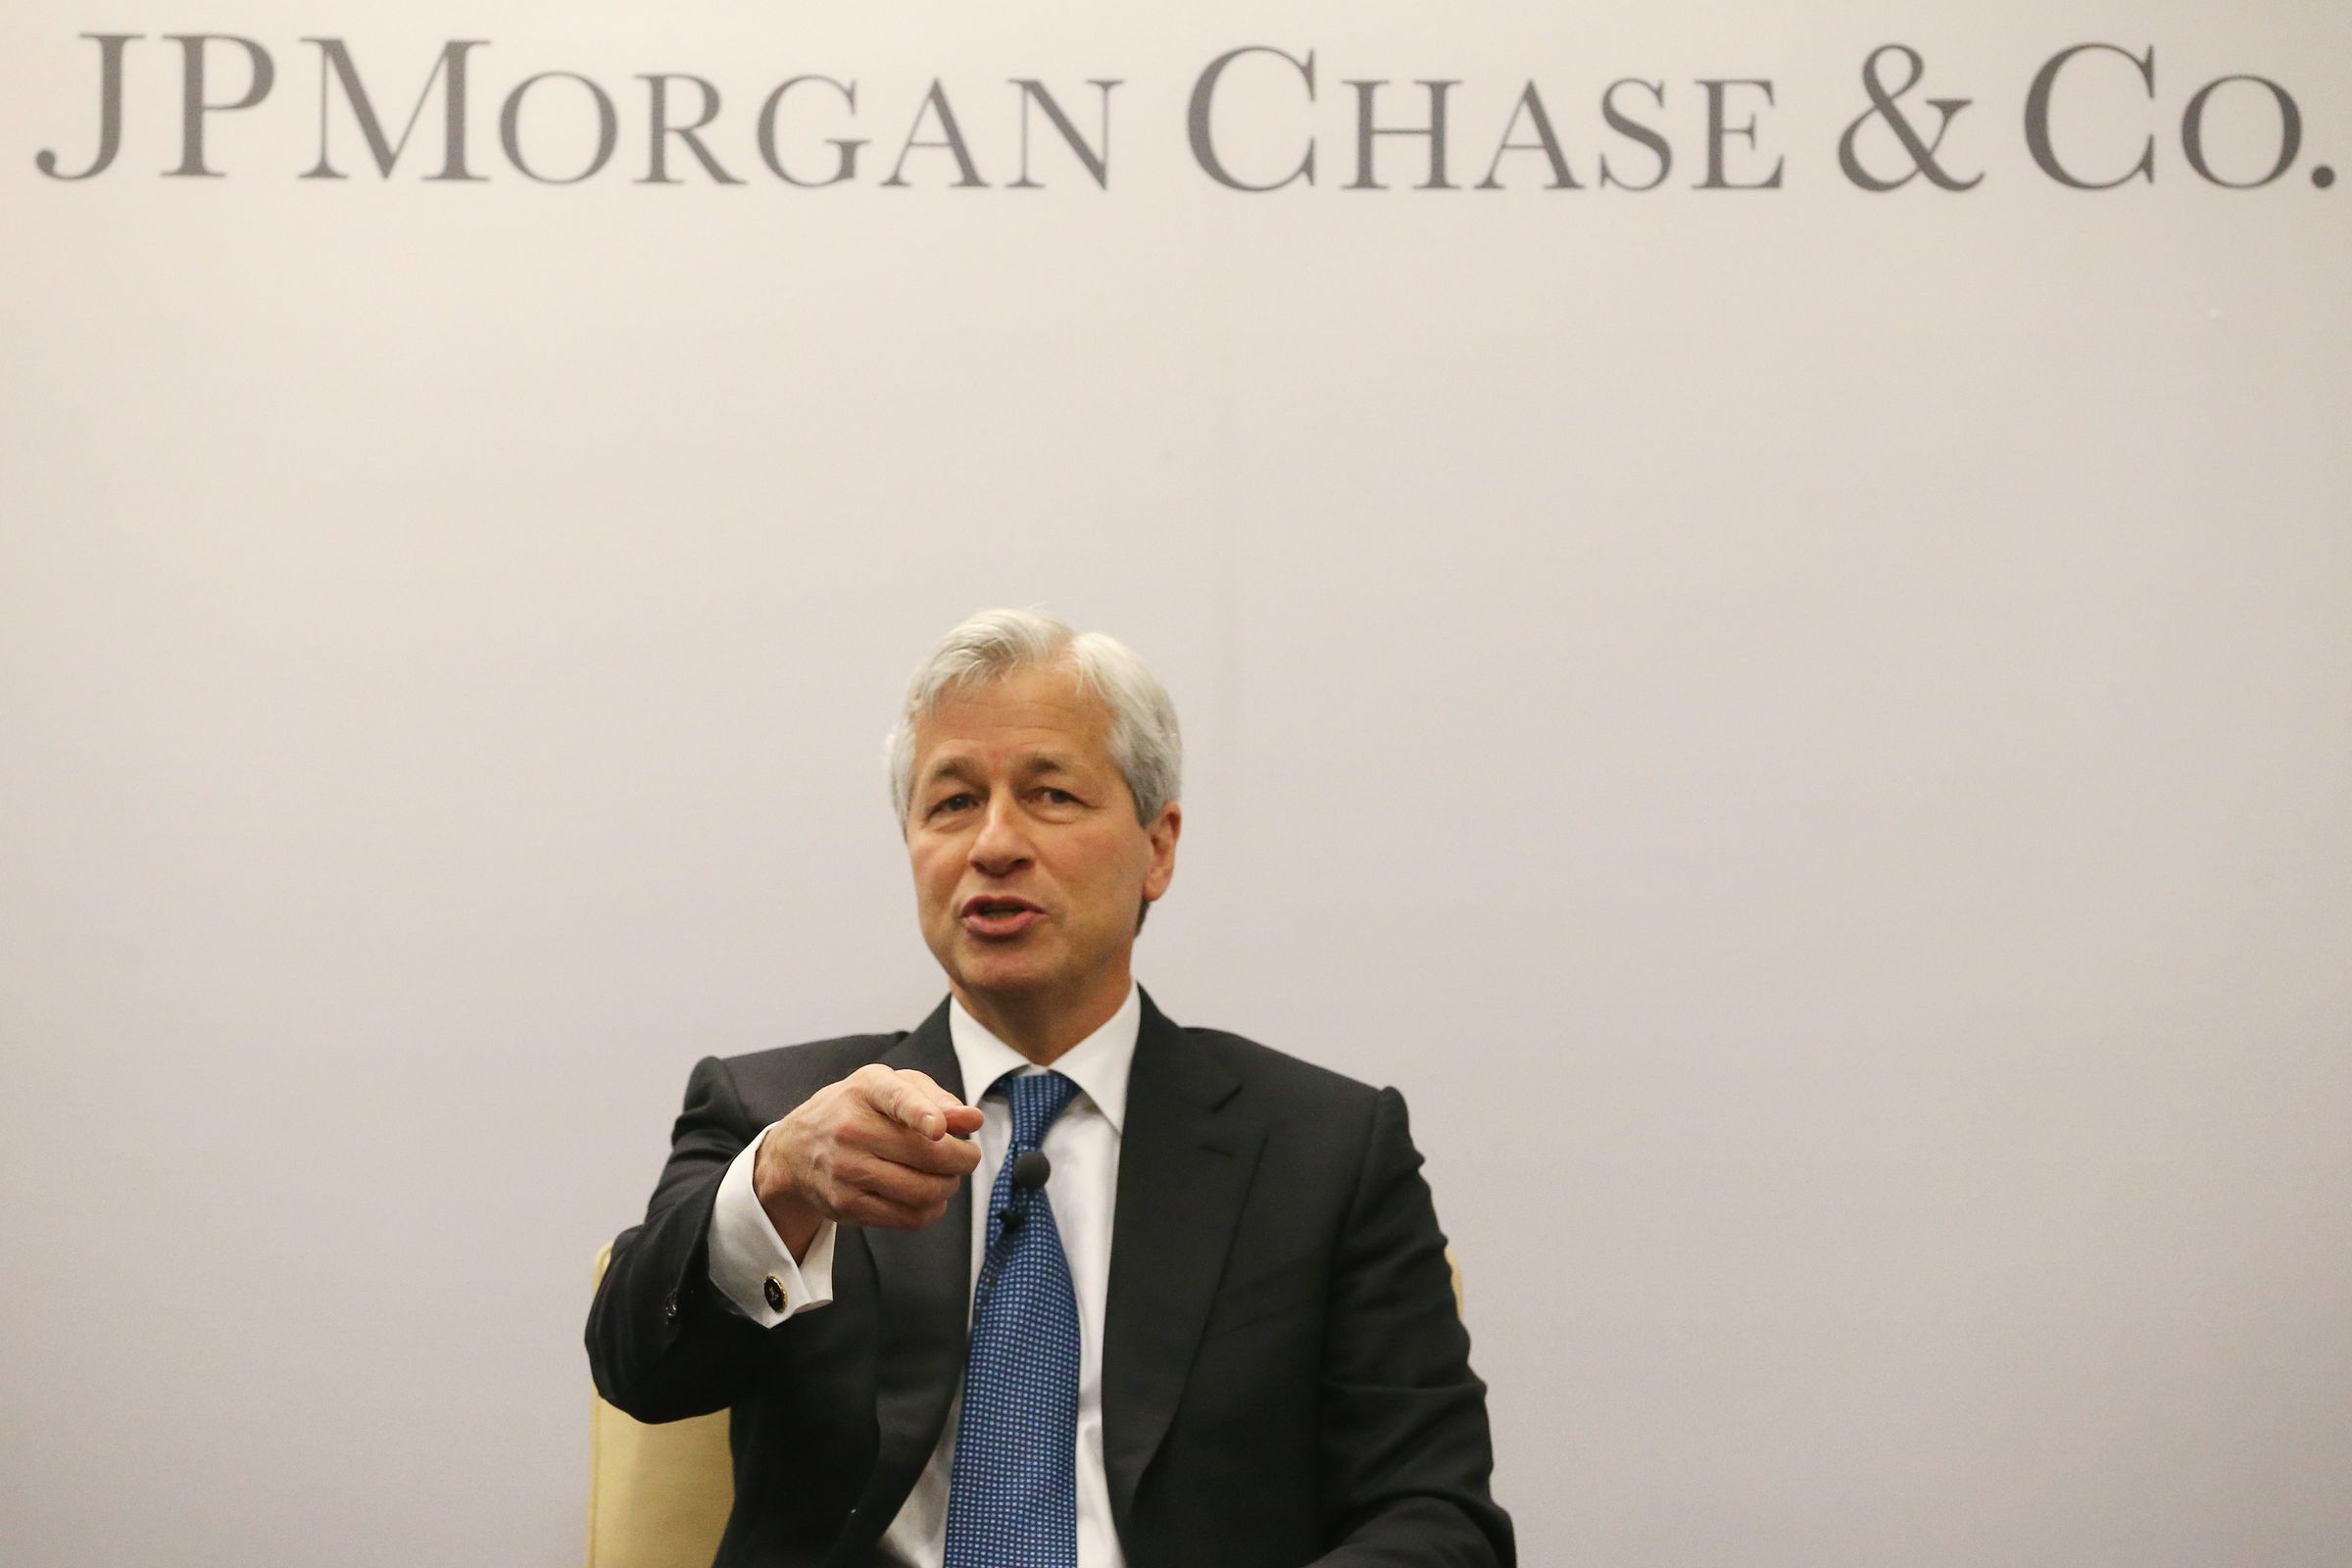 JPMorgan Chase CEO Jamie Dimon And Detroit Mayor Duggan Discuss The Bank’s Investment In Detroit